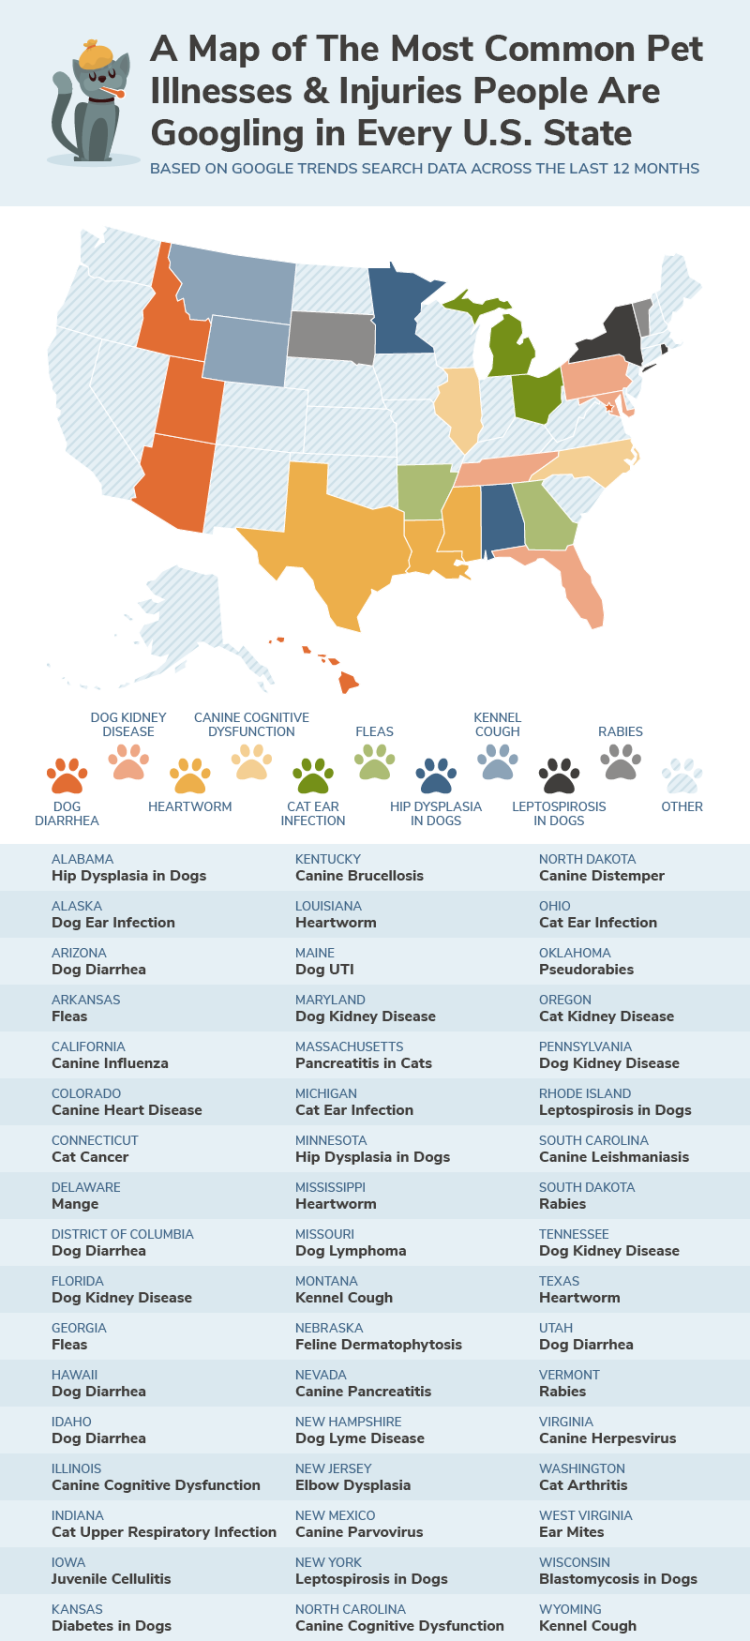 A U.S. map showing where pet illnesses and injuries are commonly searched